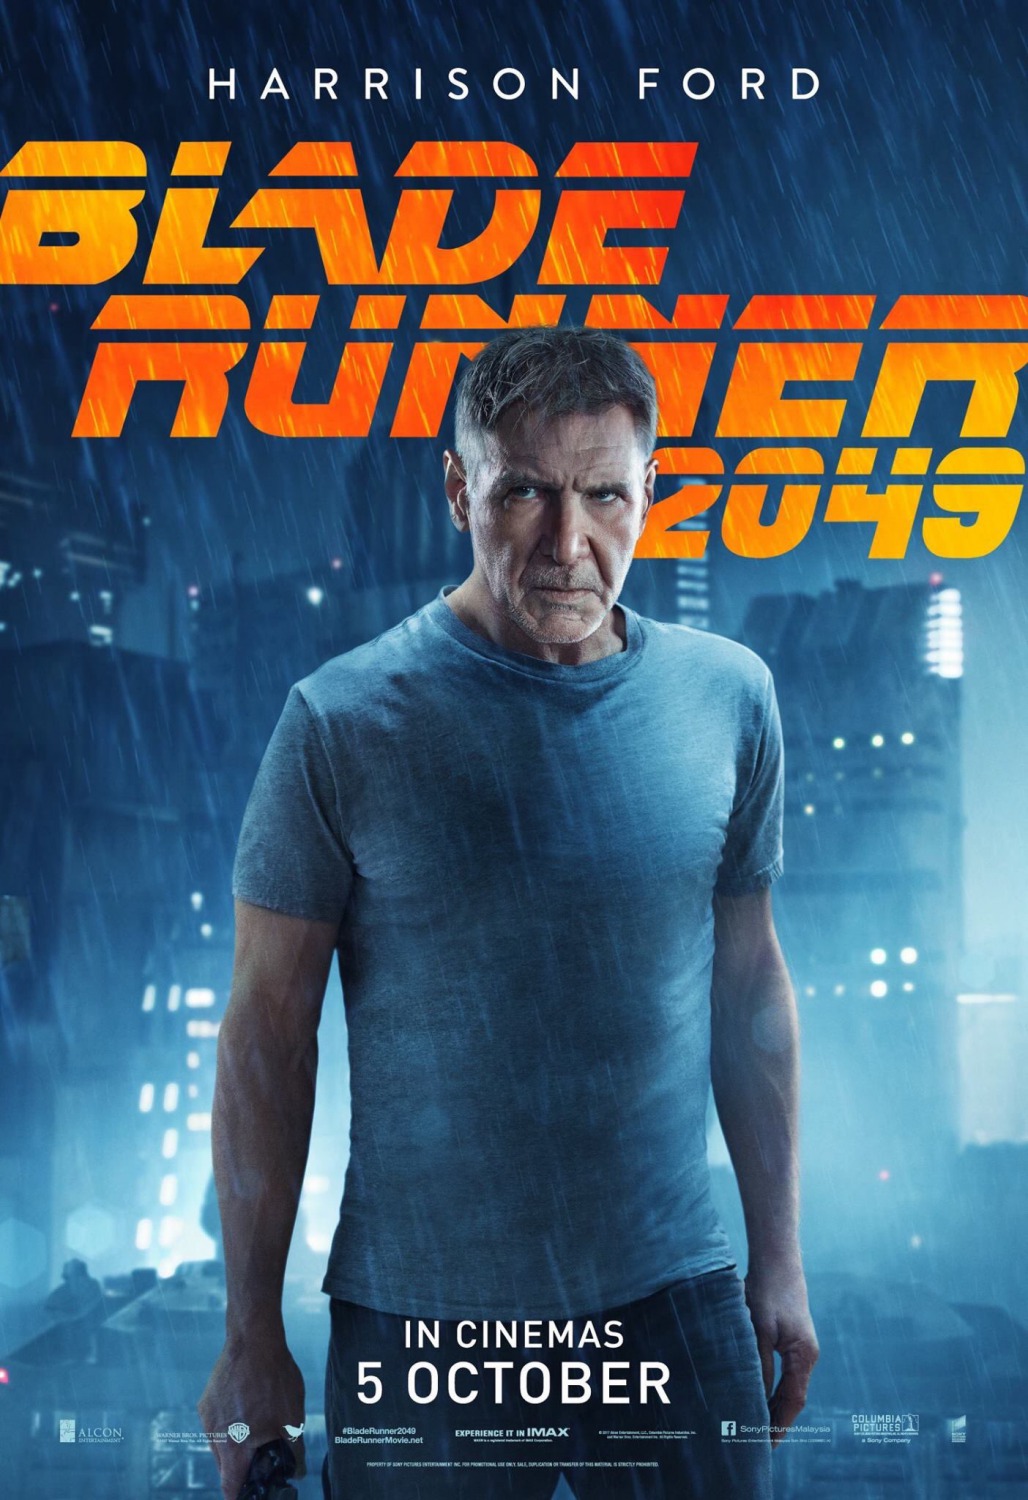 Blade Runner Il Character Poster Di Harrison Ford Movieplayer It